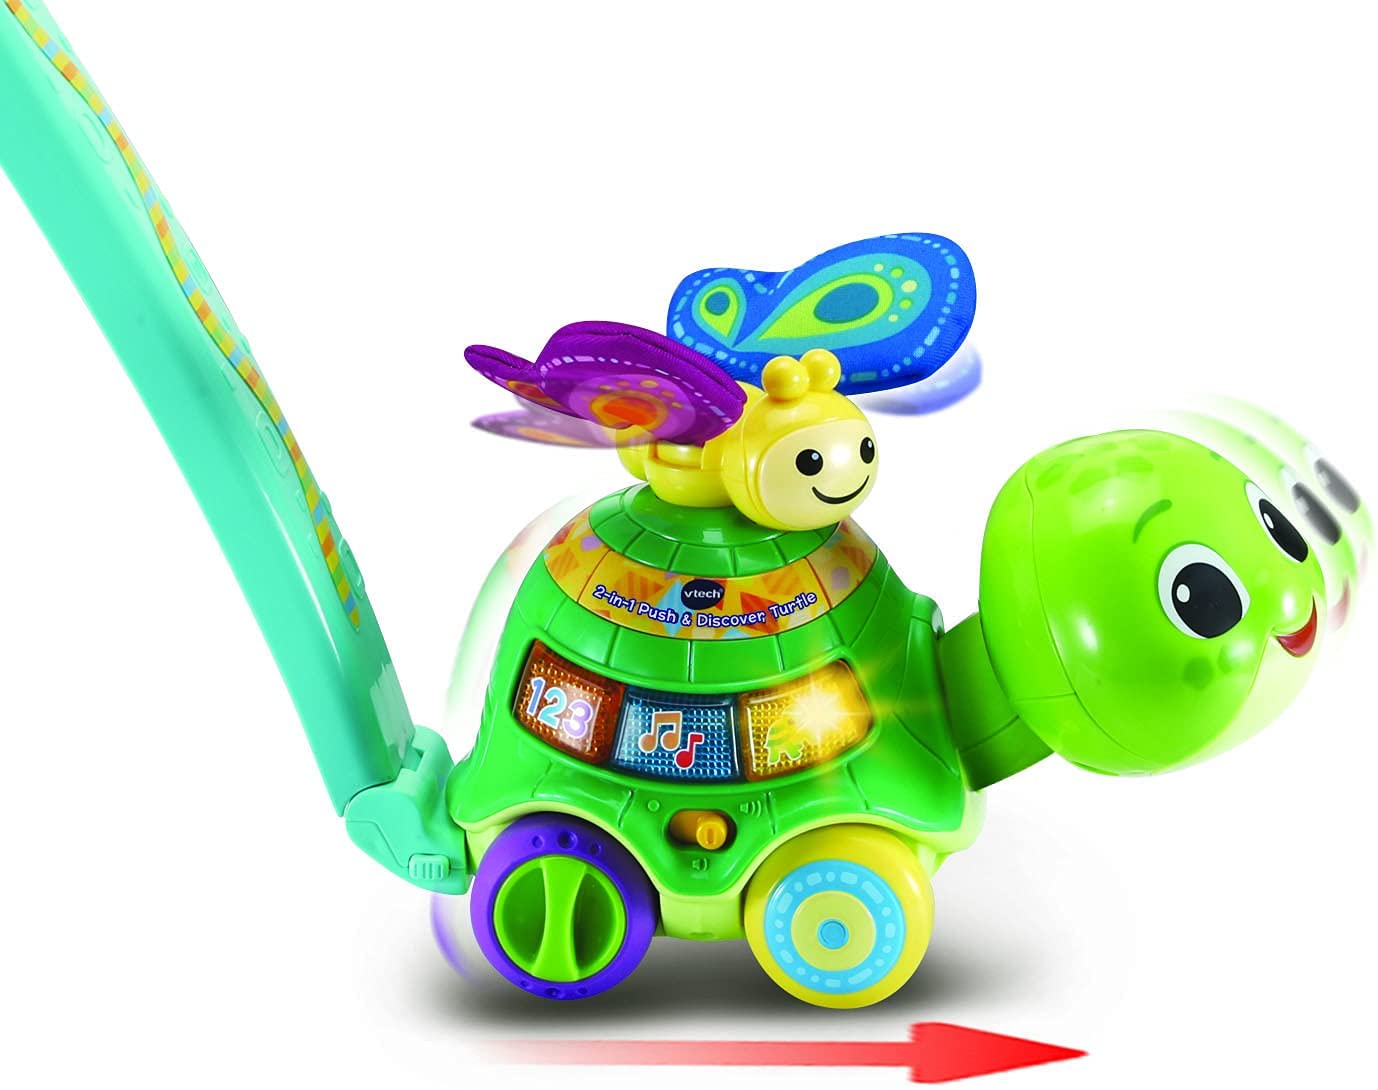 Vtech 2 in 1 Push & Discover Turtle (80-547603)